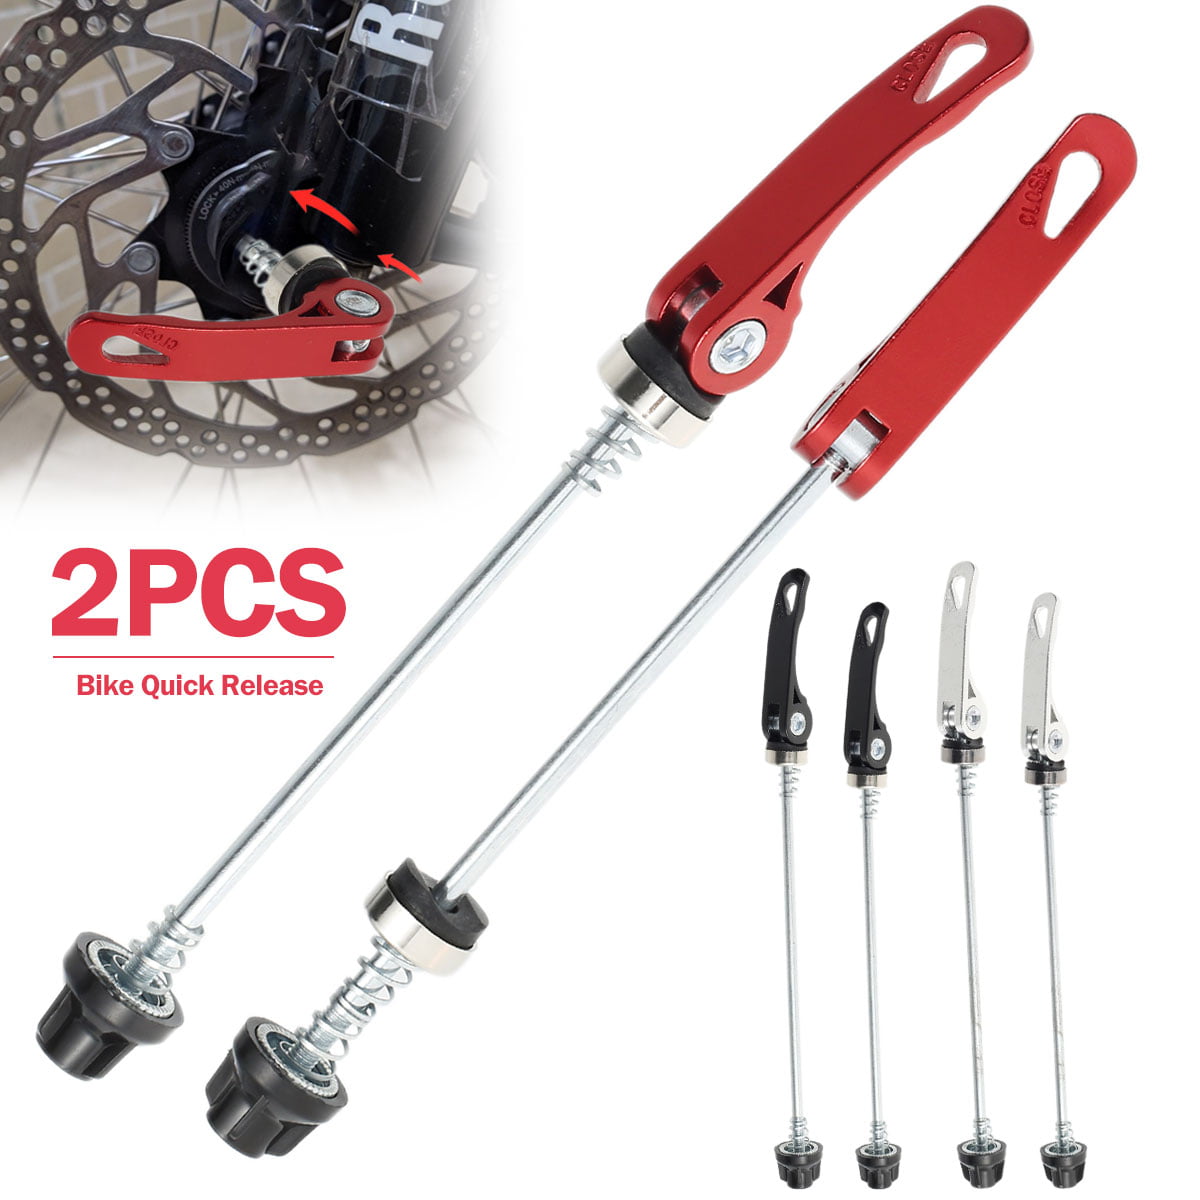 2X Mountain Bike Skewers Road Bicycle Quick Release Front Rear Axle Skewer Set